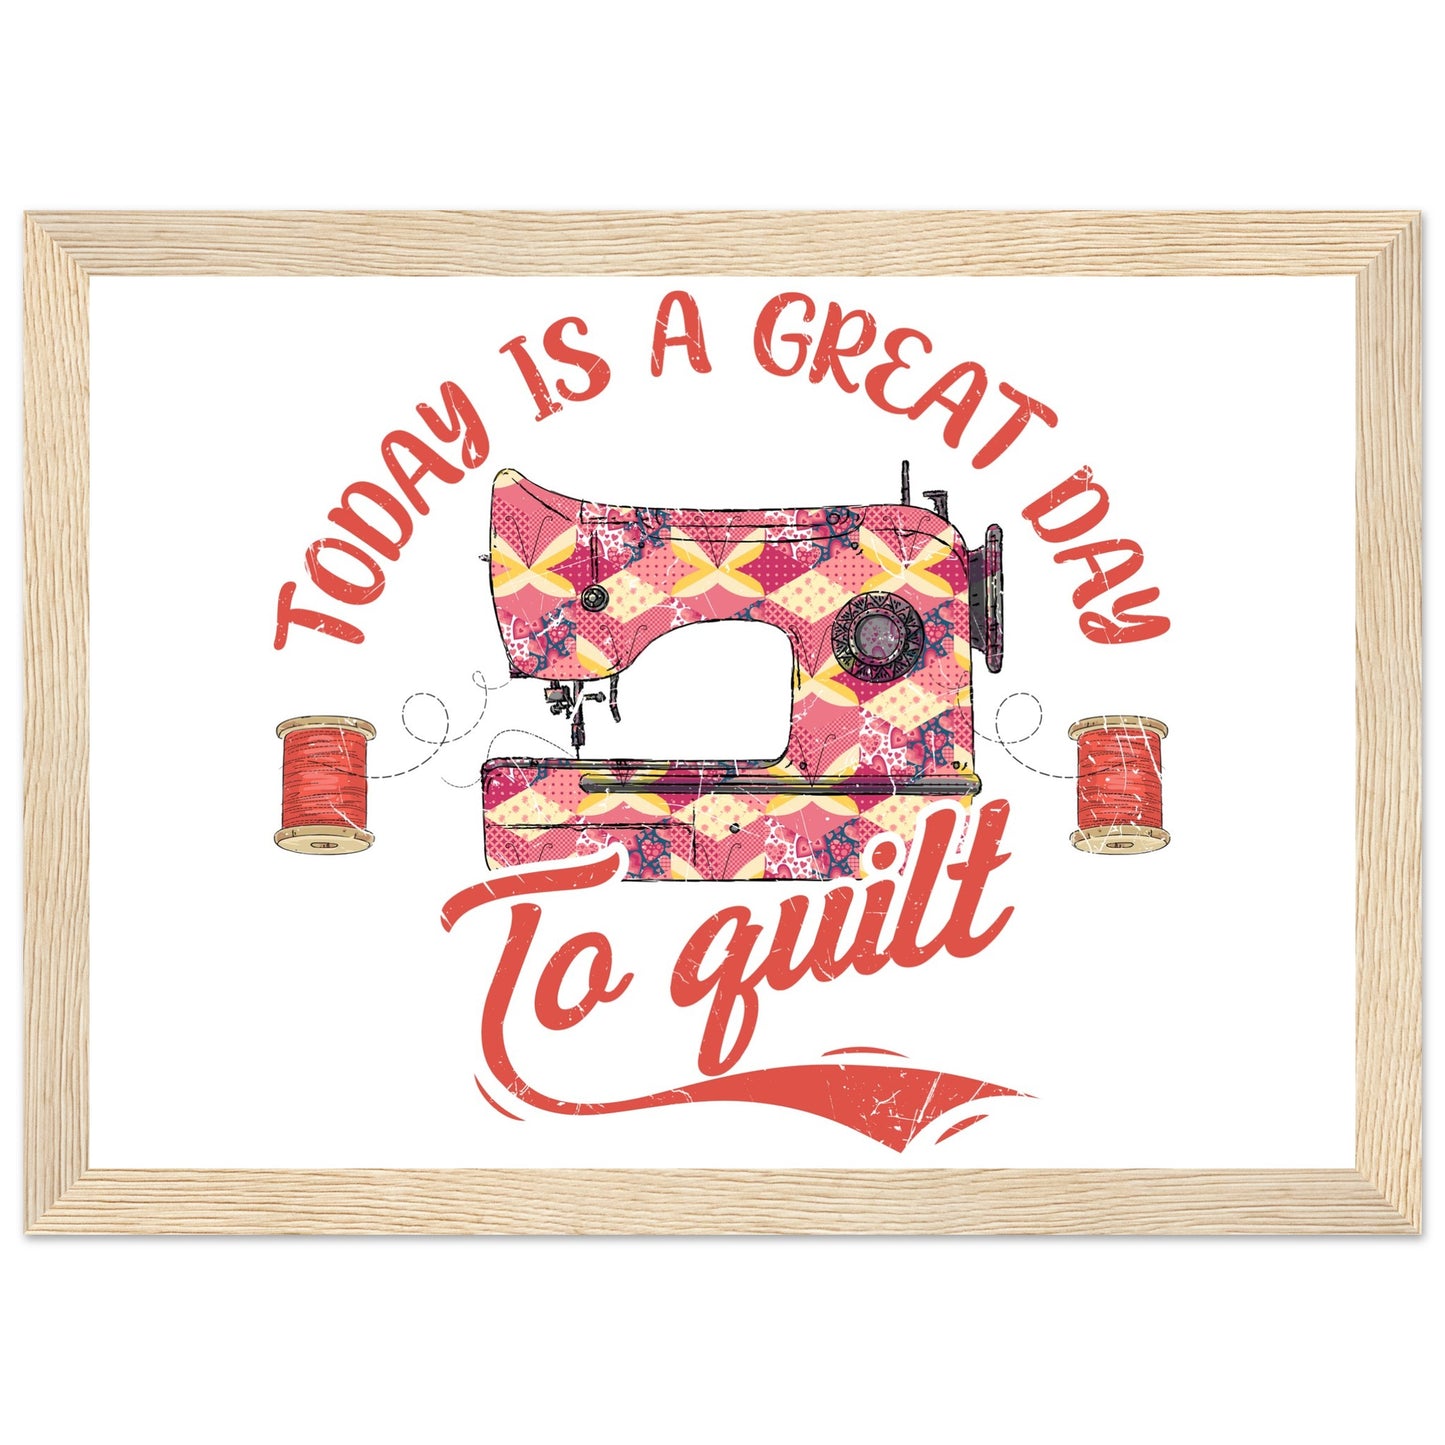 Today is a Great Day to Quilt - Quilting Wall Art - Premium Matte Paper Wooden Framed Poster